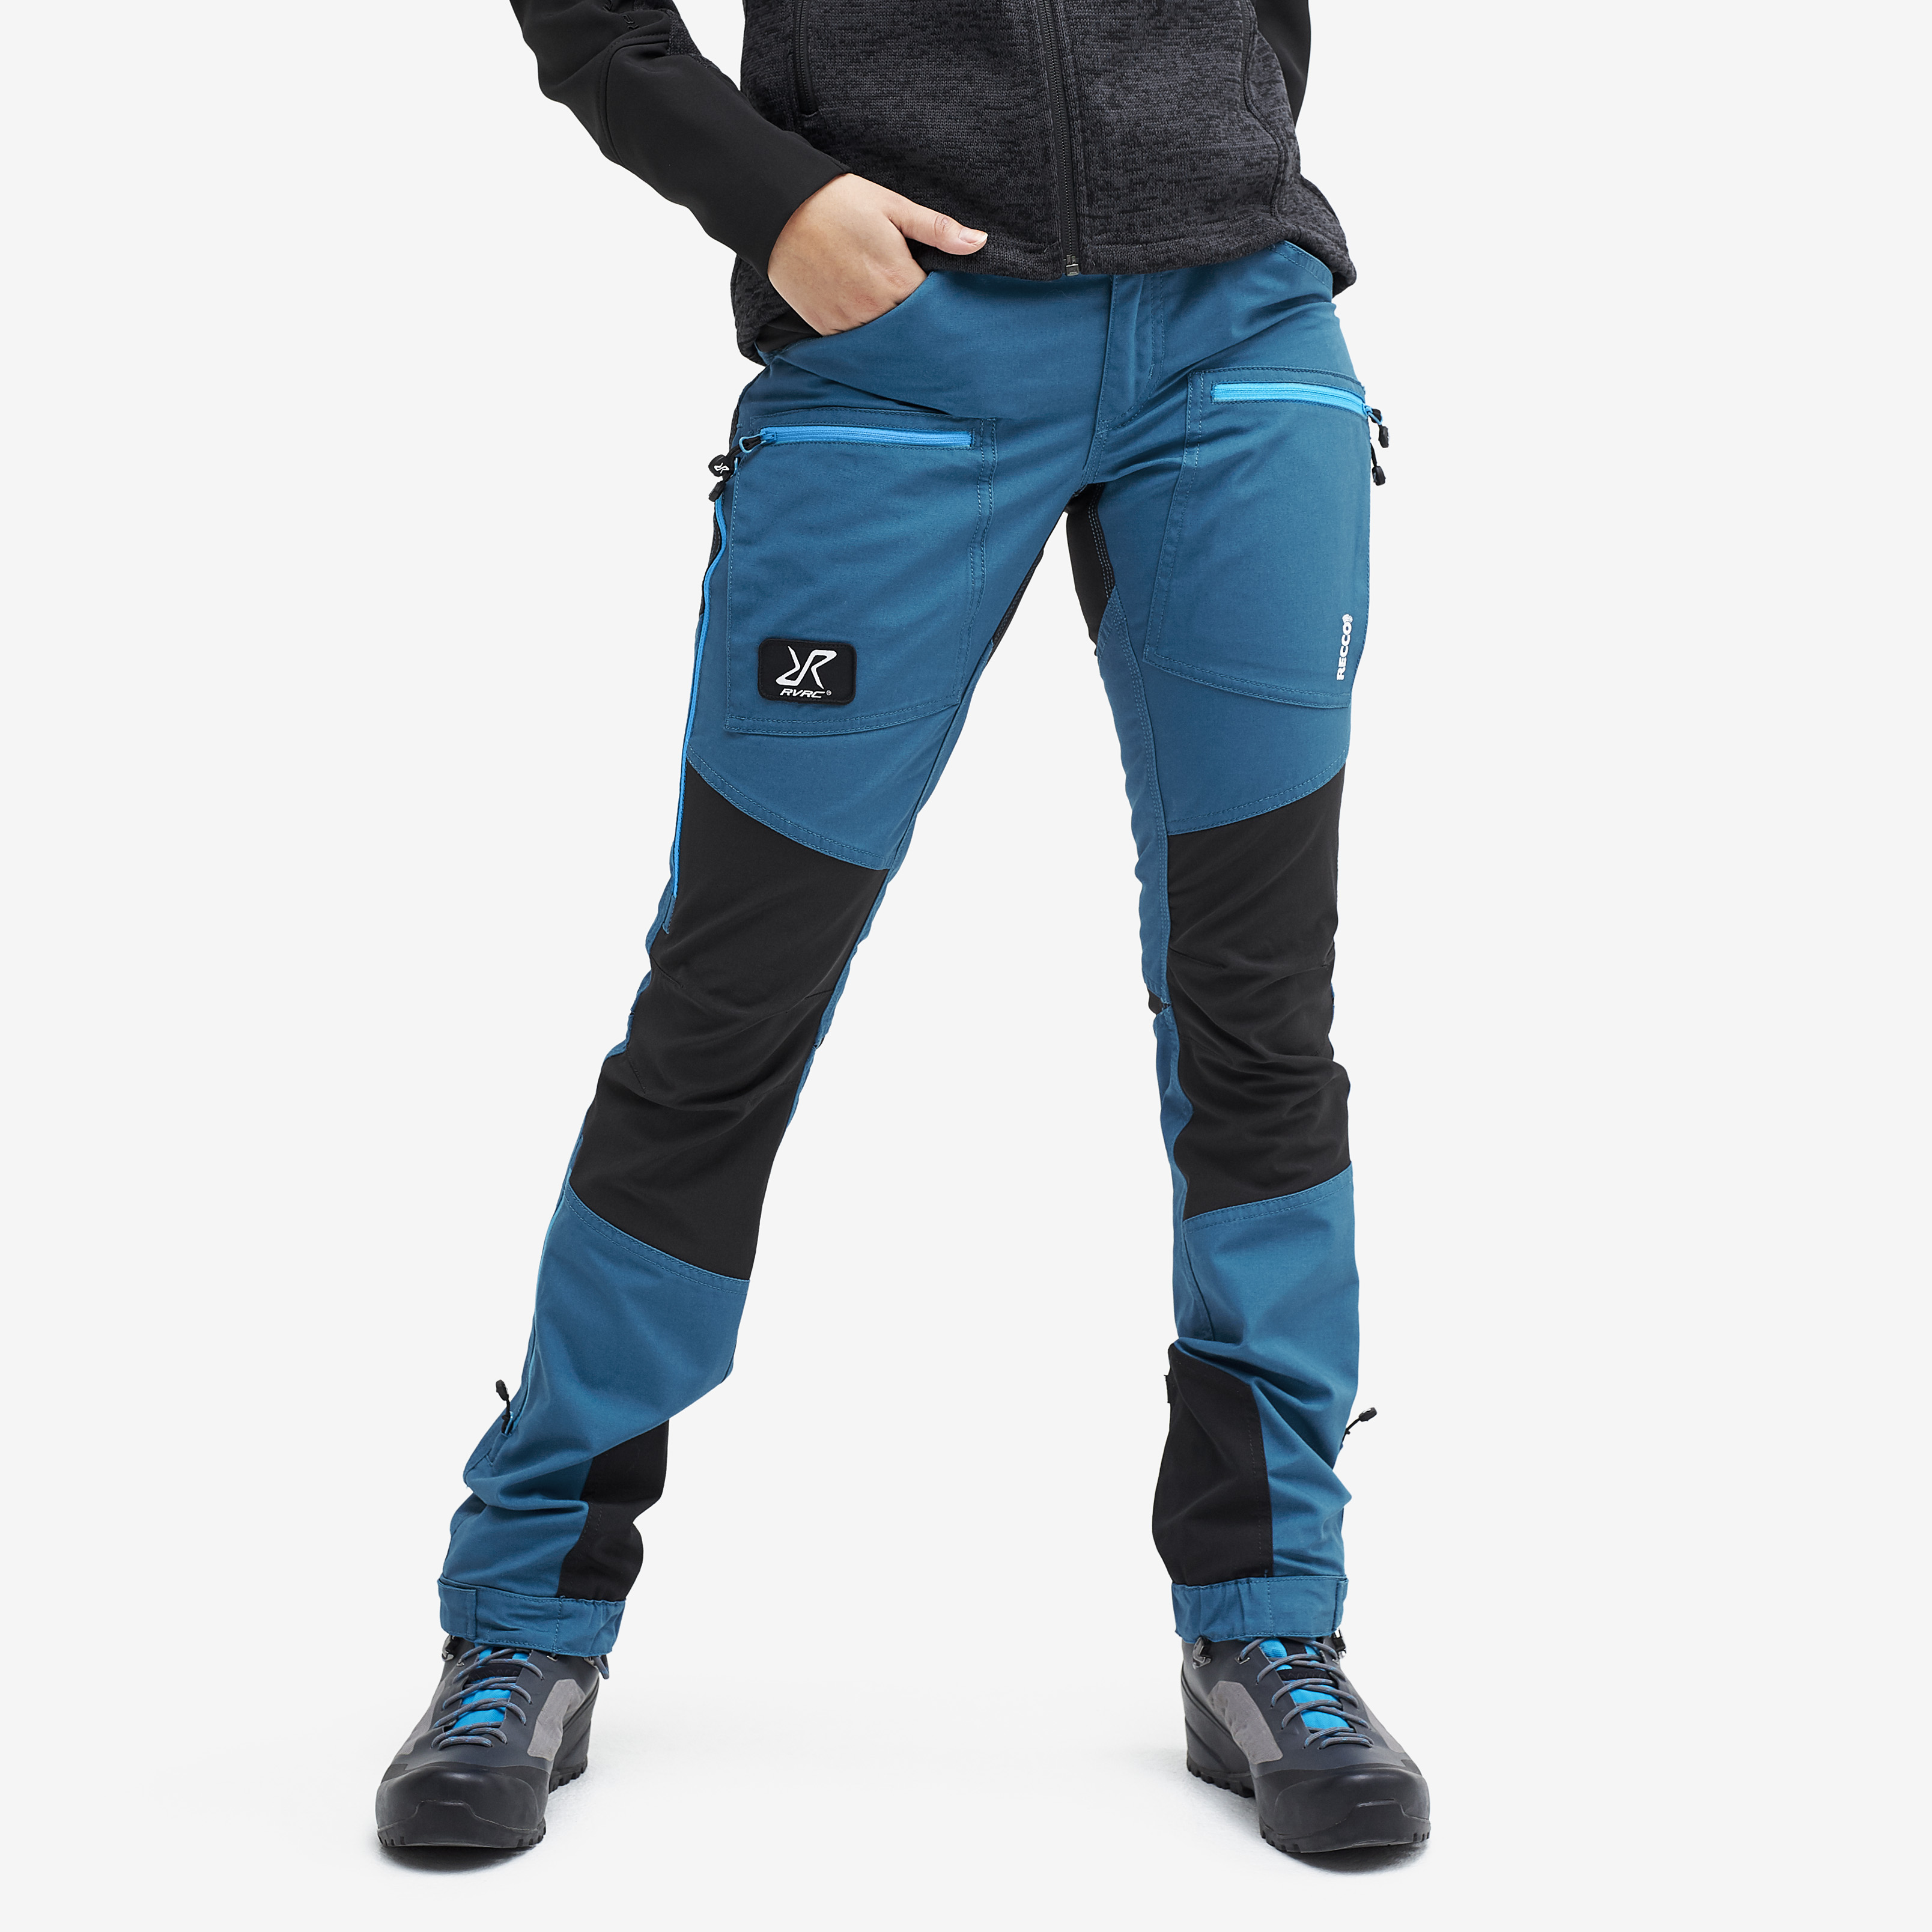 Nordwand Pro Rescue hiking pants for women in blue